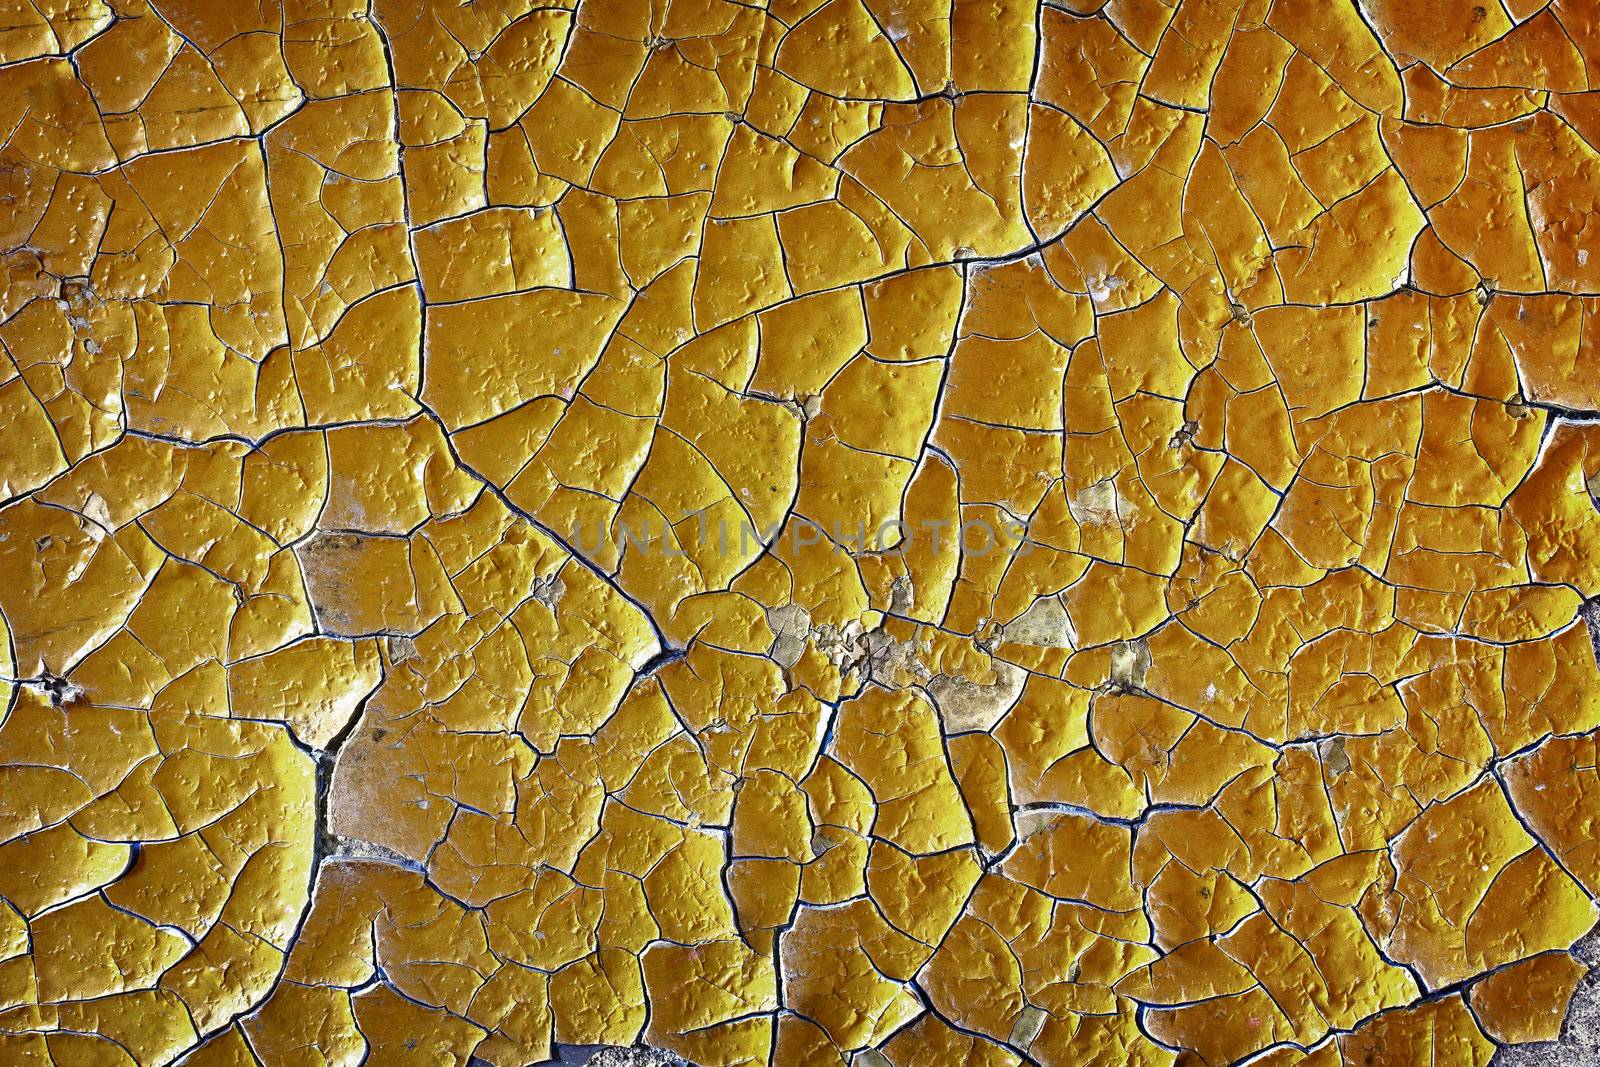 Large cracks on old oil paint by pzaxe